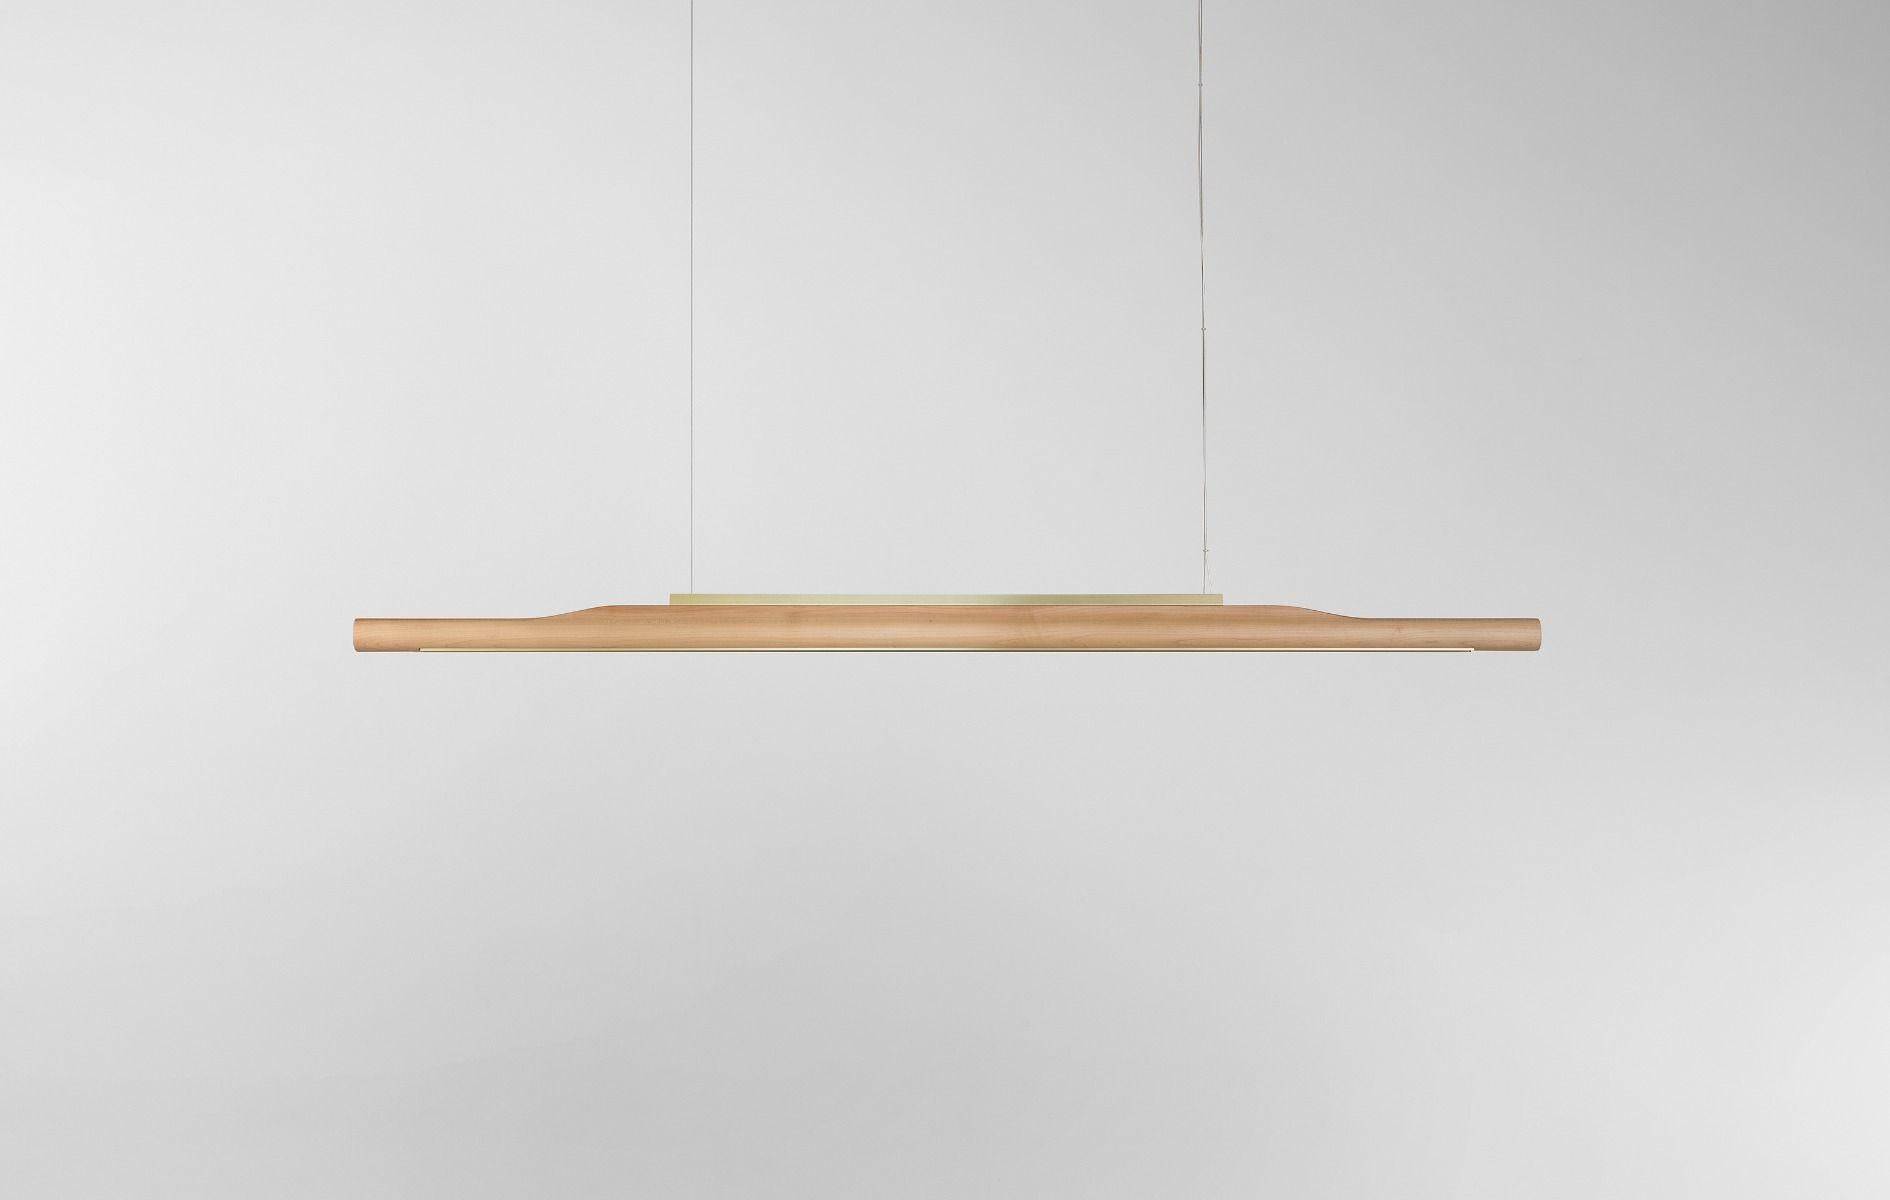 The Arbour Linear light, is a continual timber solid, formed to unite space and celebrate the beauty of the natural. Created by the divergence of two curves that flow along and around the product.

The body of the pendant is machined from various